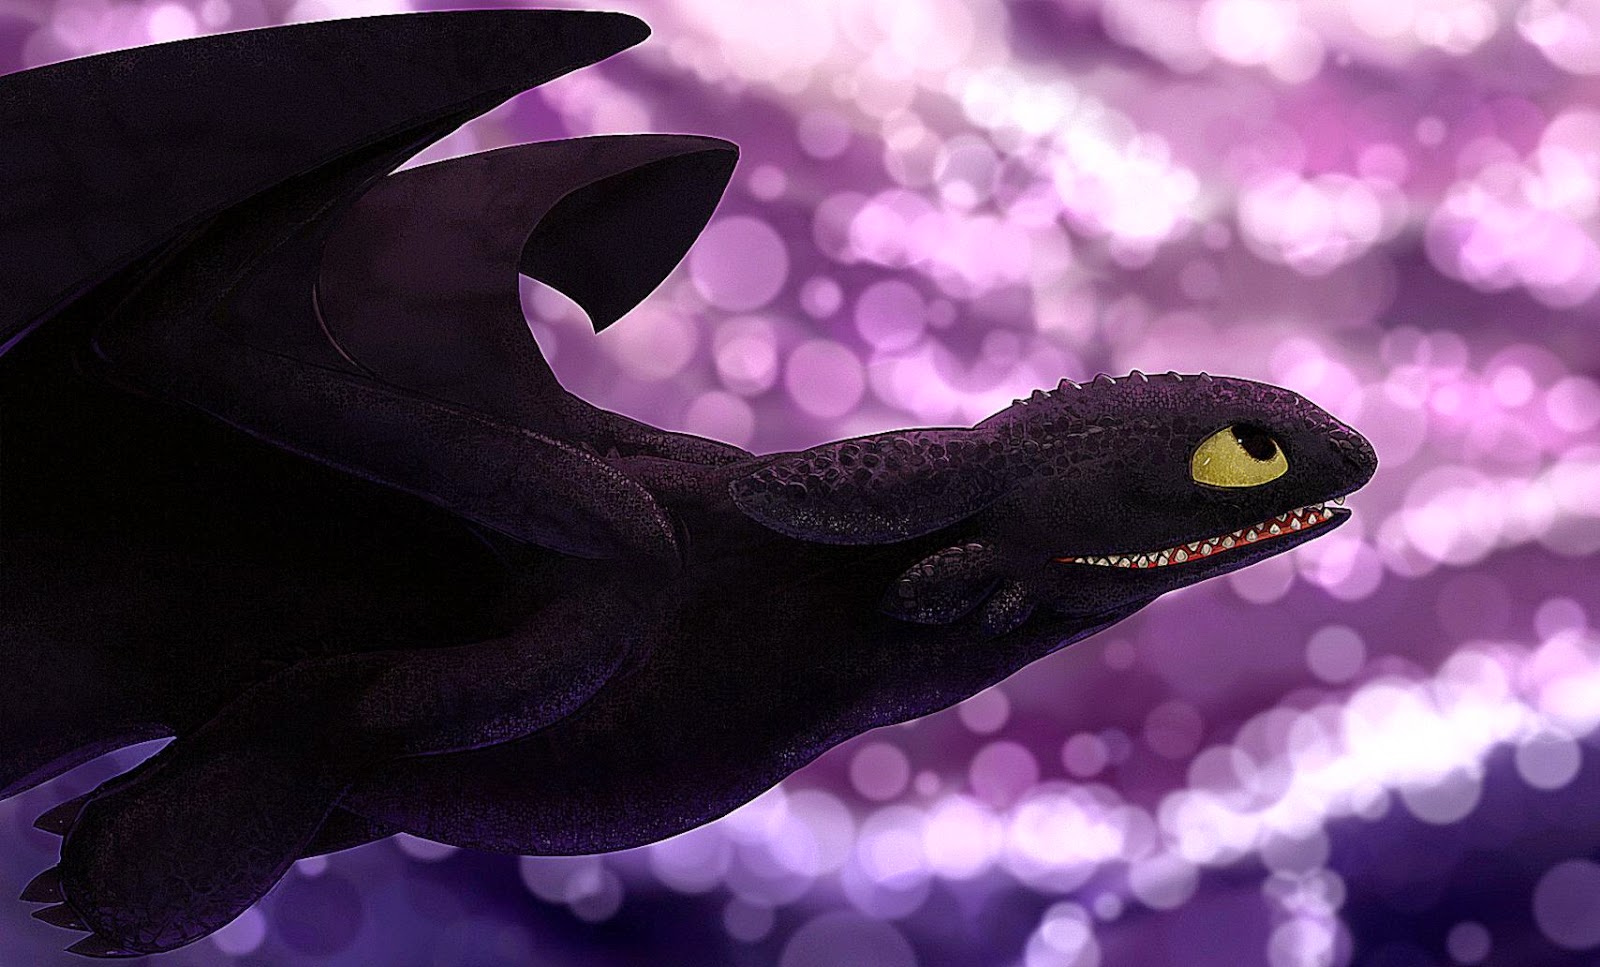 Toothless The Dragon Wallpaper Cool HD Wallpapers 1600x967. 